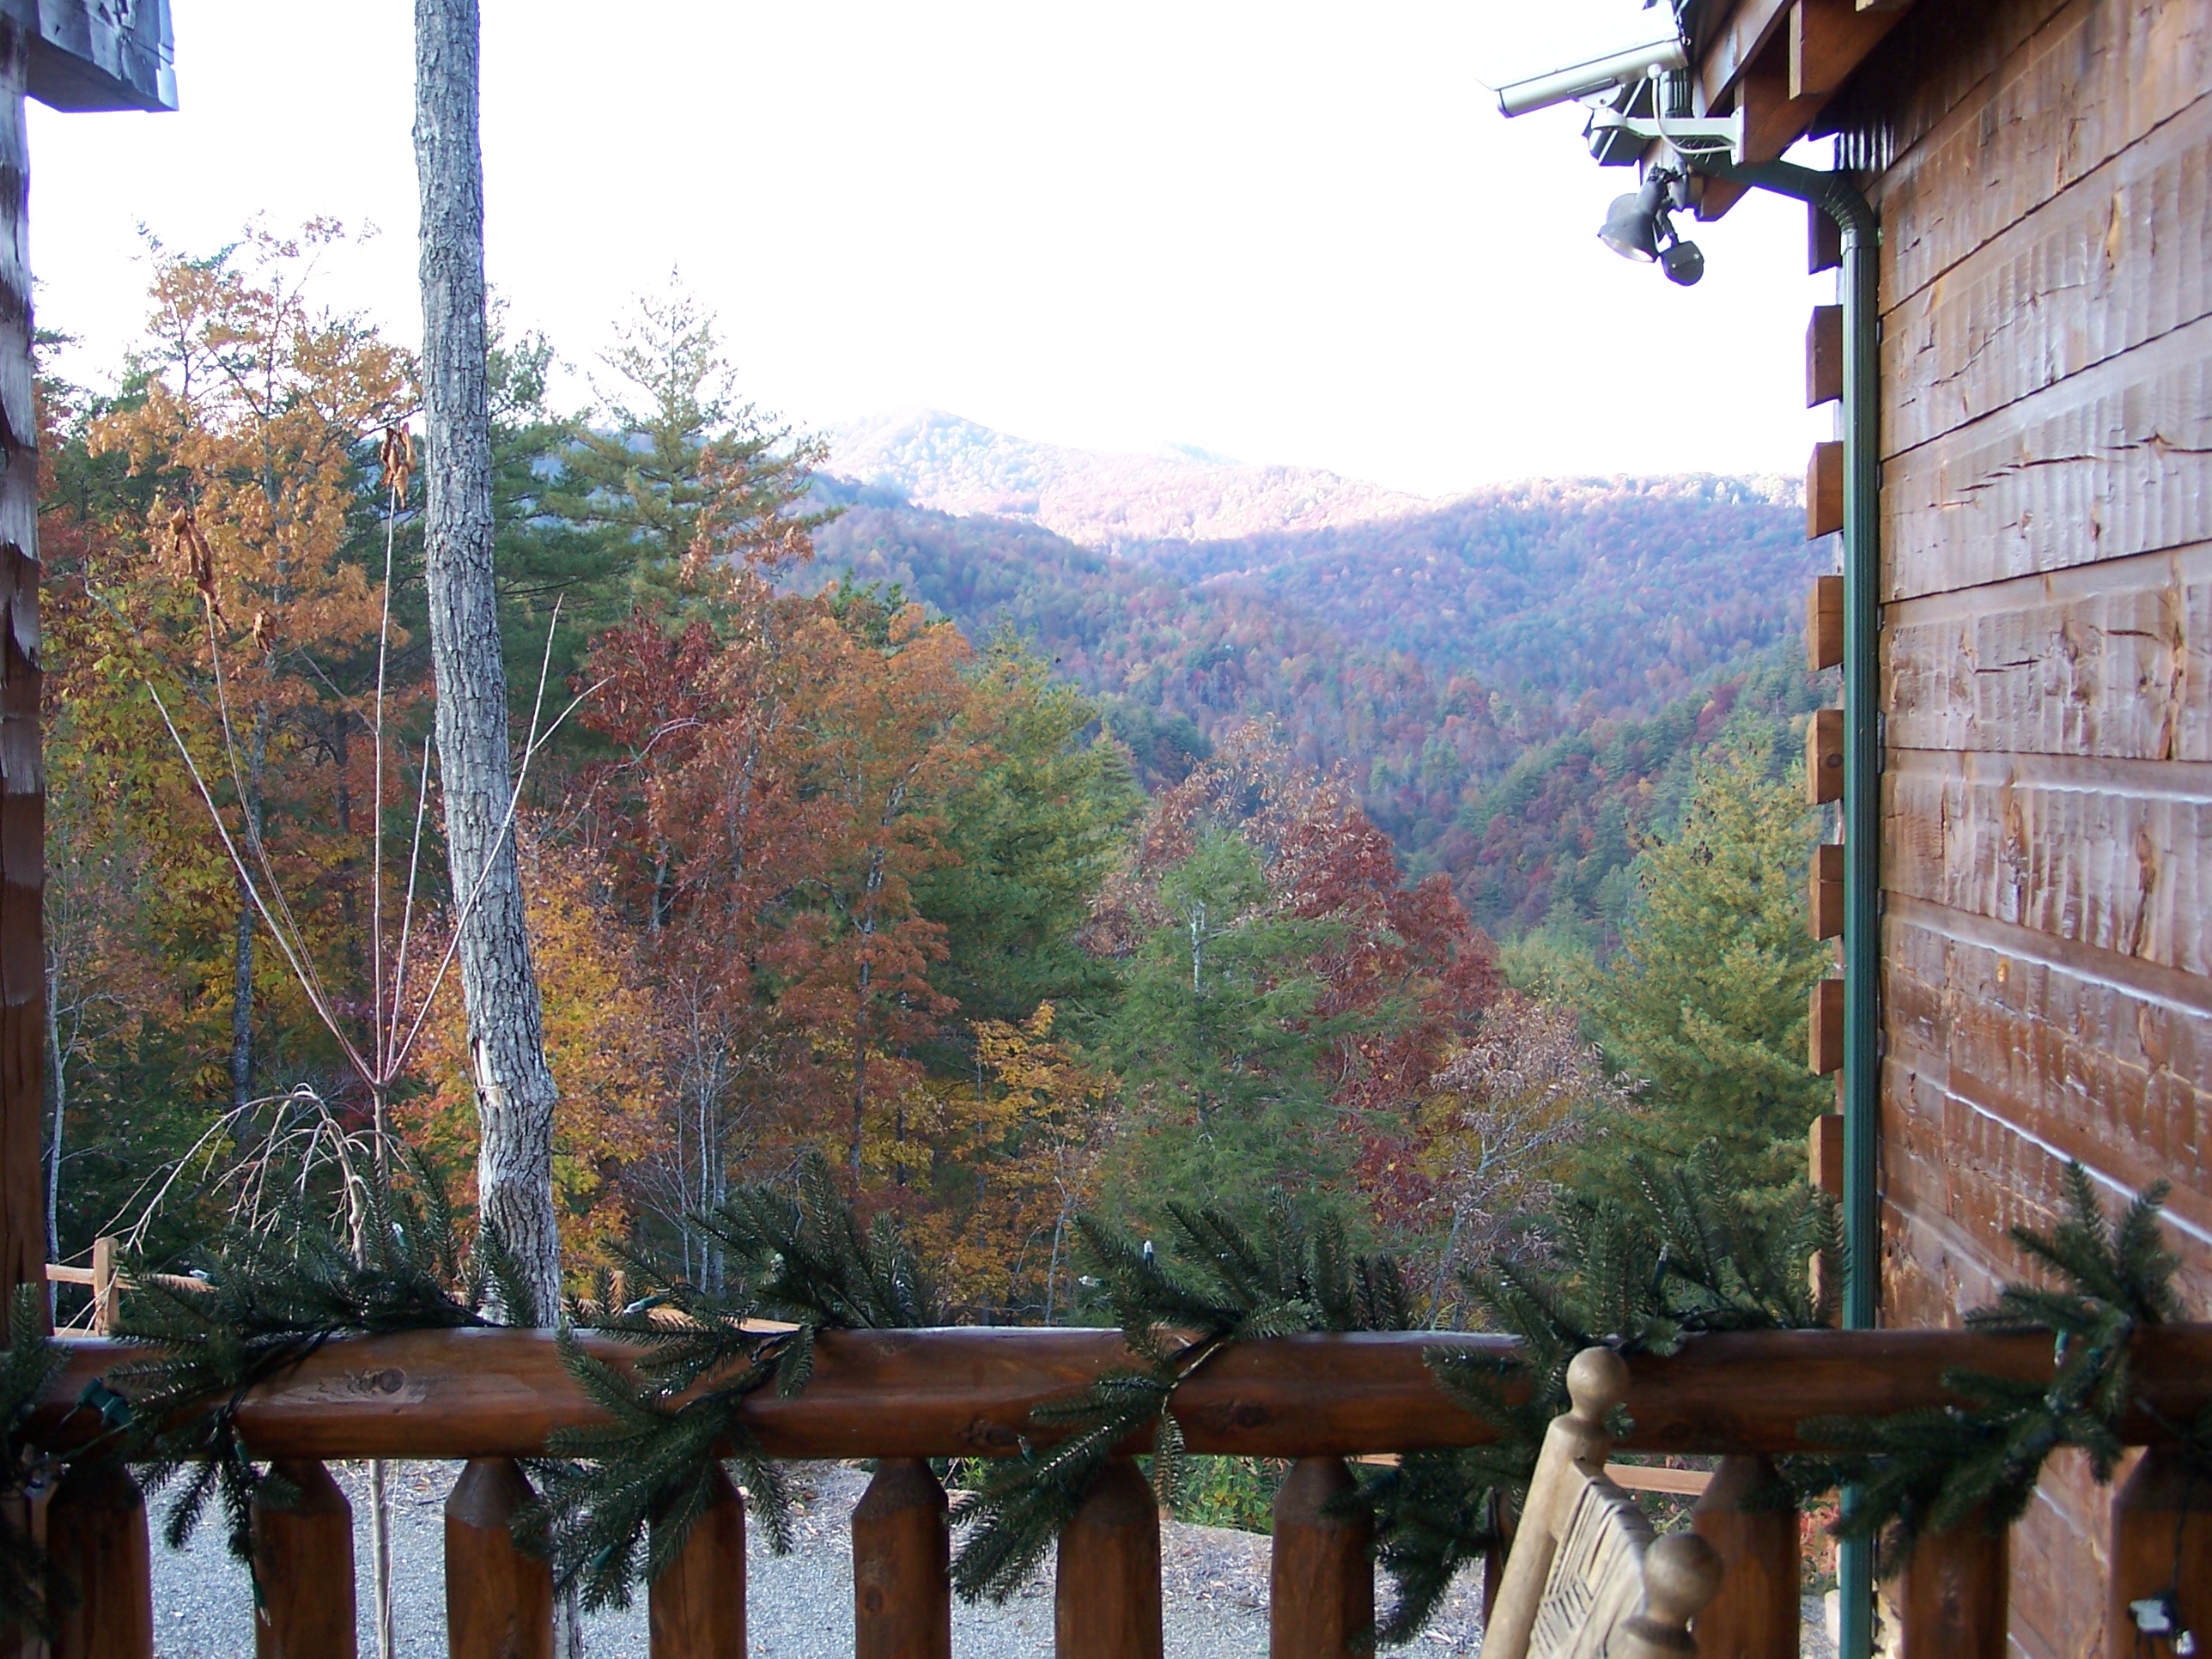 Taken Off Front Deck Toward Firetower. Check Out The Garland I Put Up That Weekend.